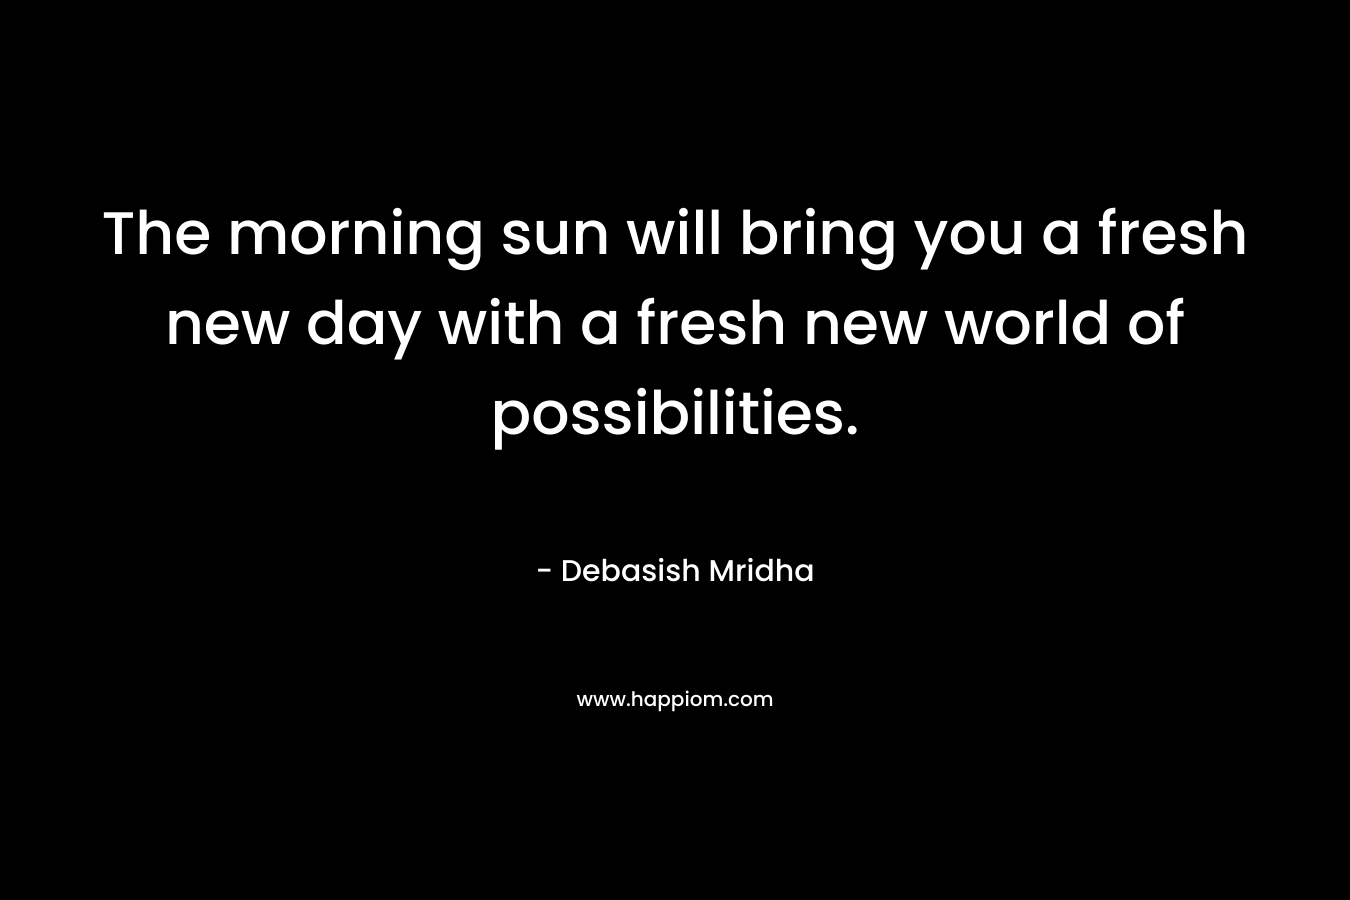 The morning sun will bring you a fresh new day with a fresh new world of possibilities.